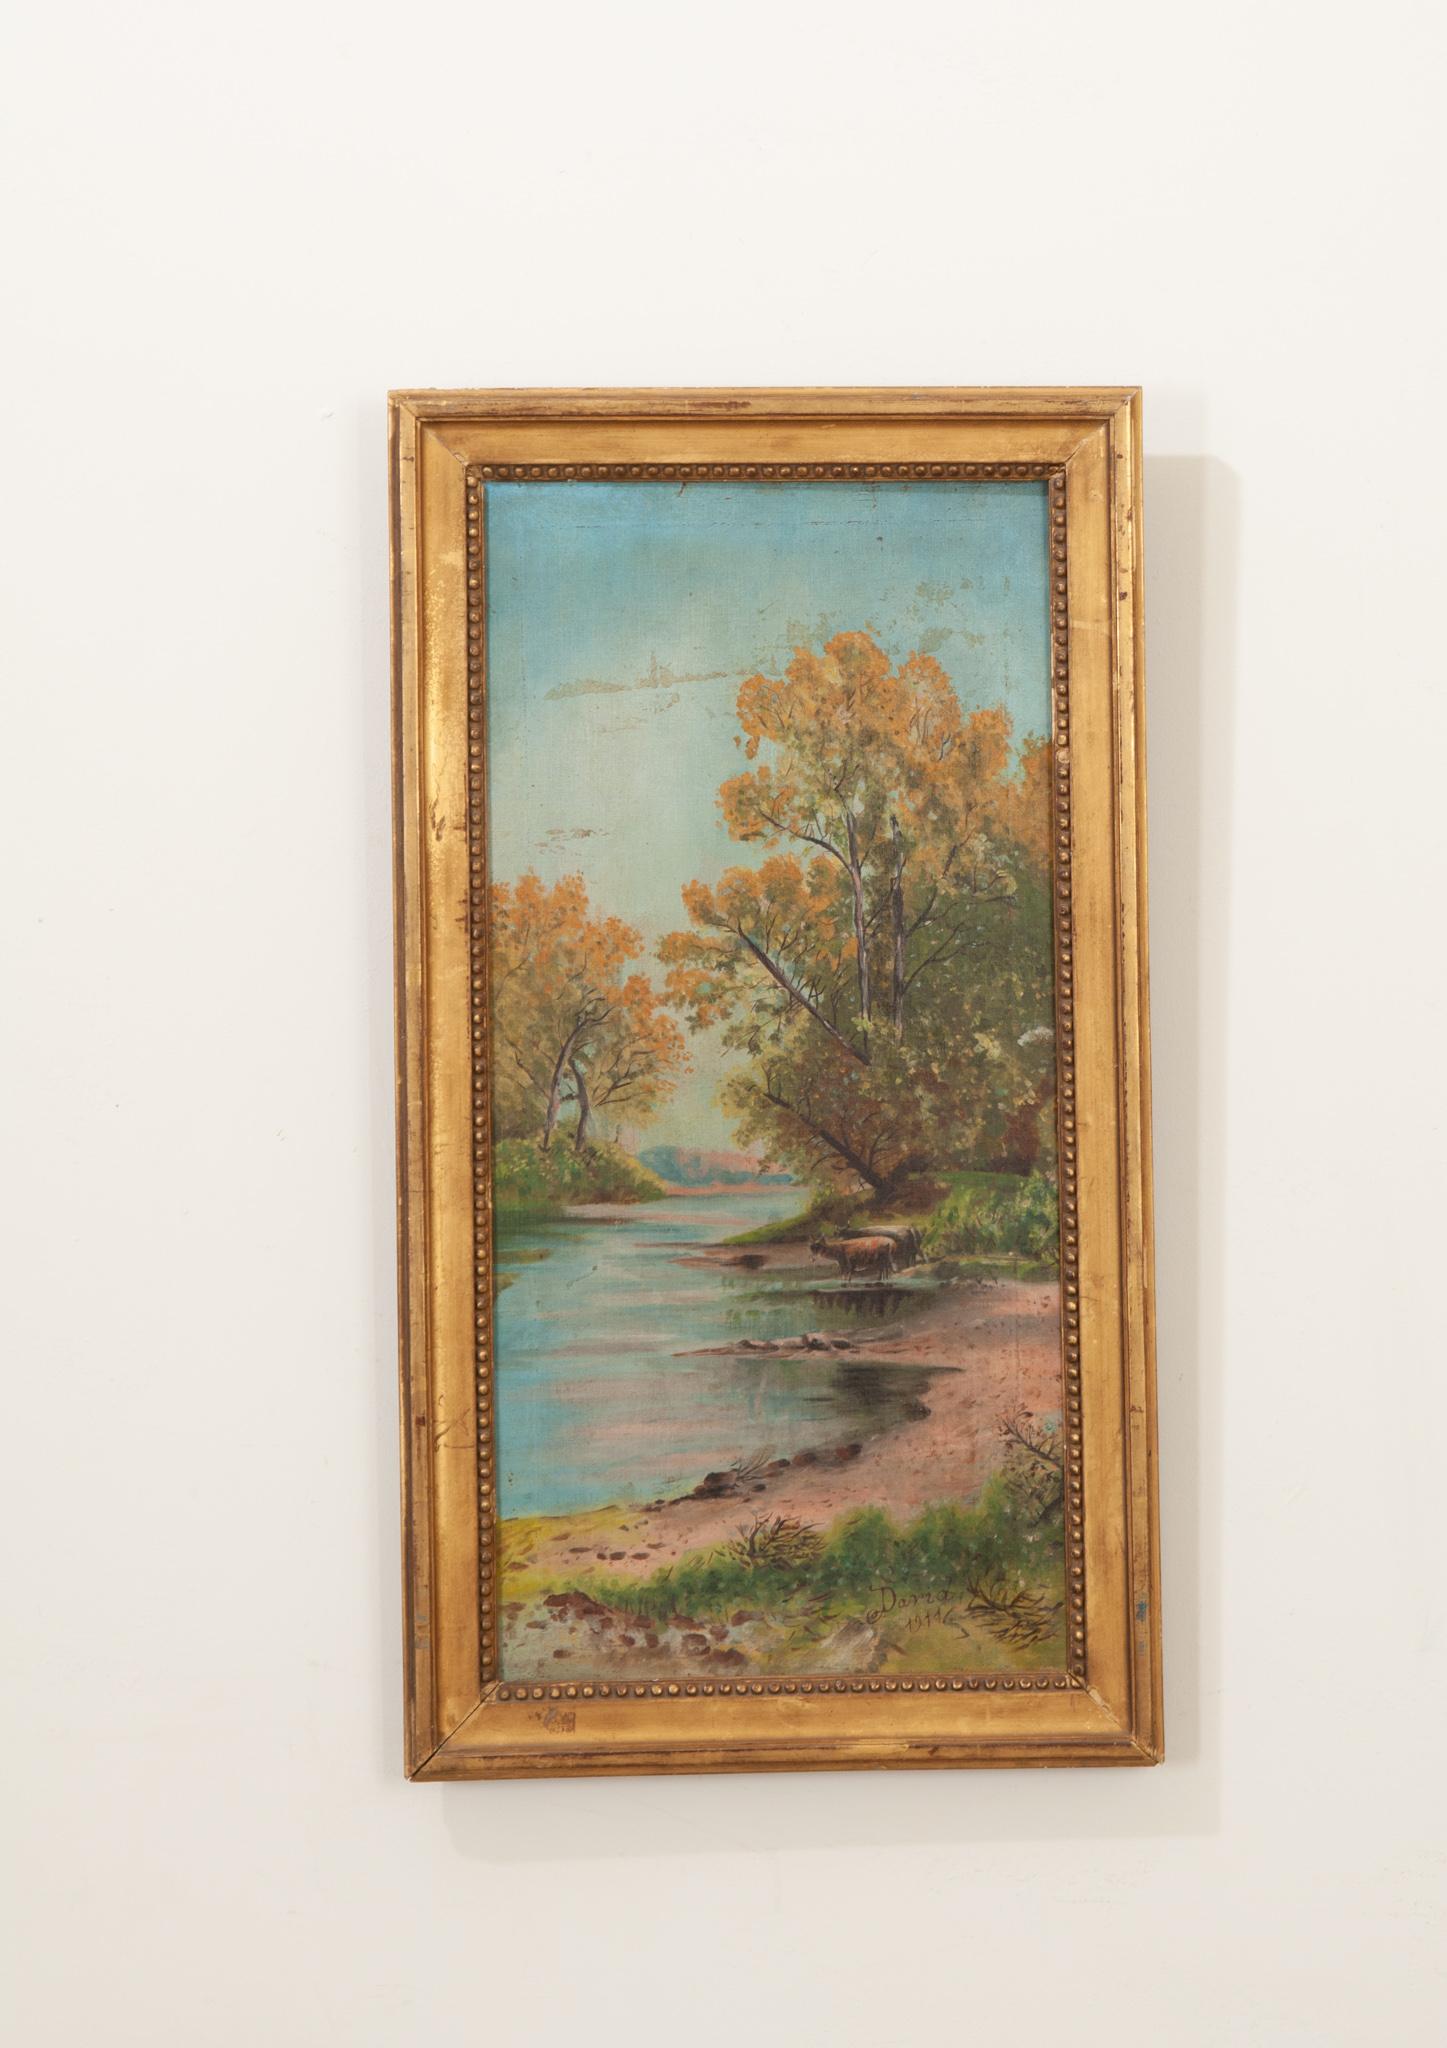 A charming vertical landscape painting in a carved gilt frame. Signed and dated on the bottom right hand corner- “Darid 1914”. Fixed with a wire on the back and ready to be hung in your interior. Make sure to view all of the images to get a closer